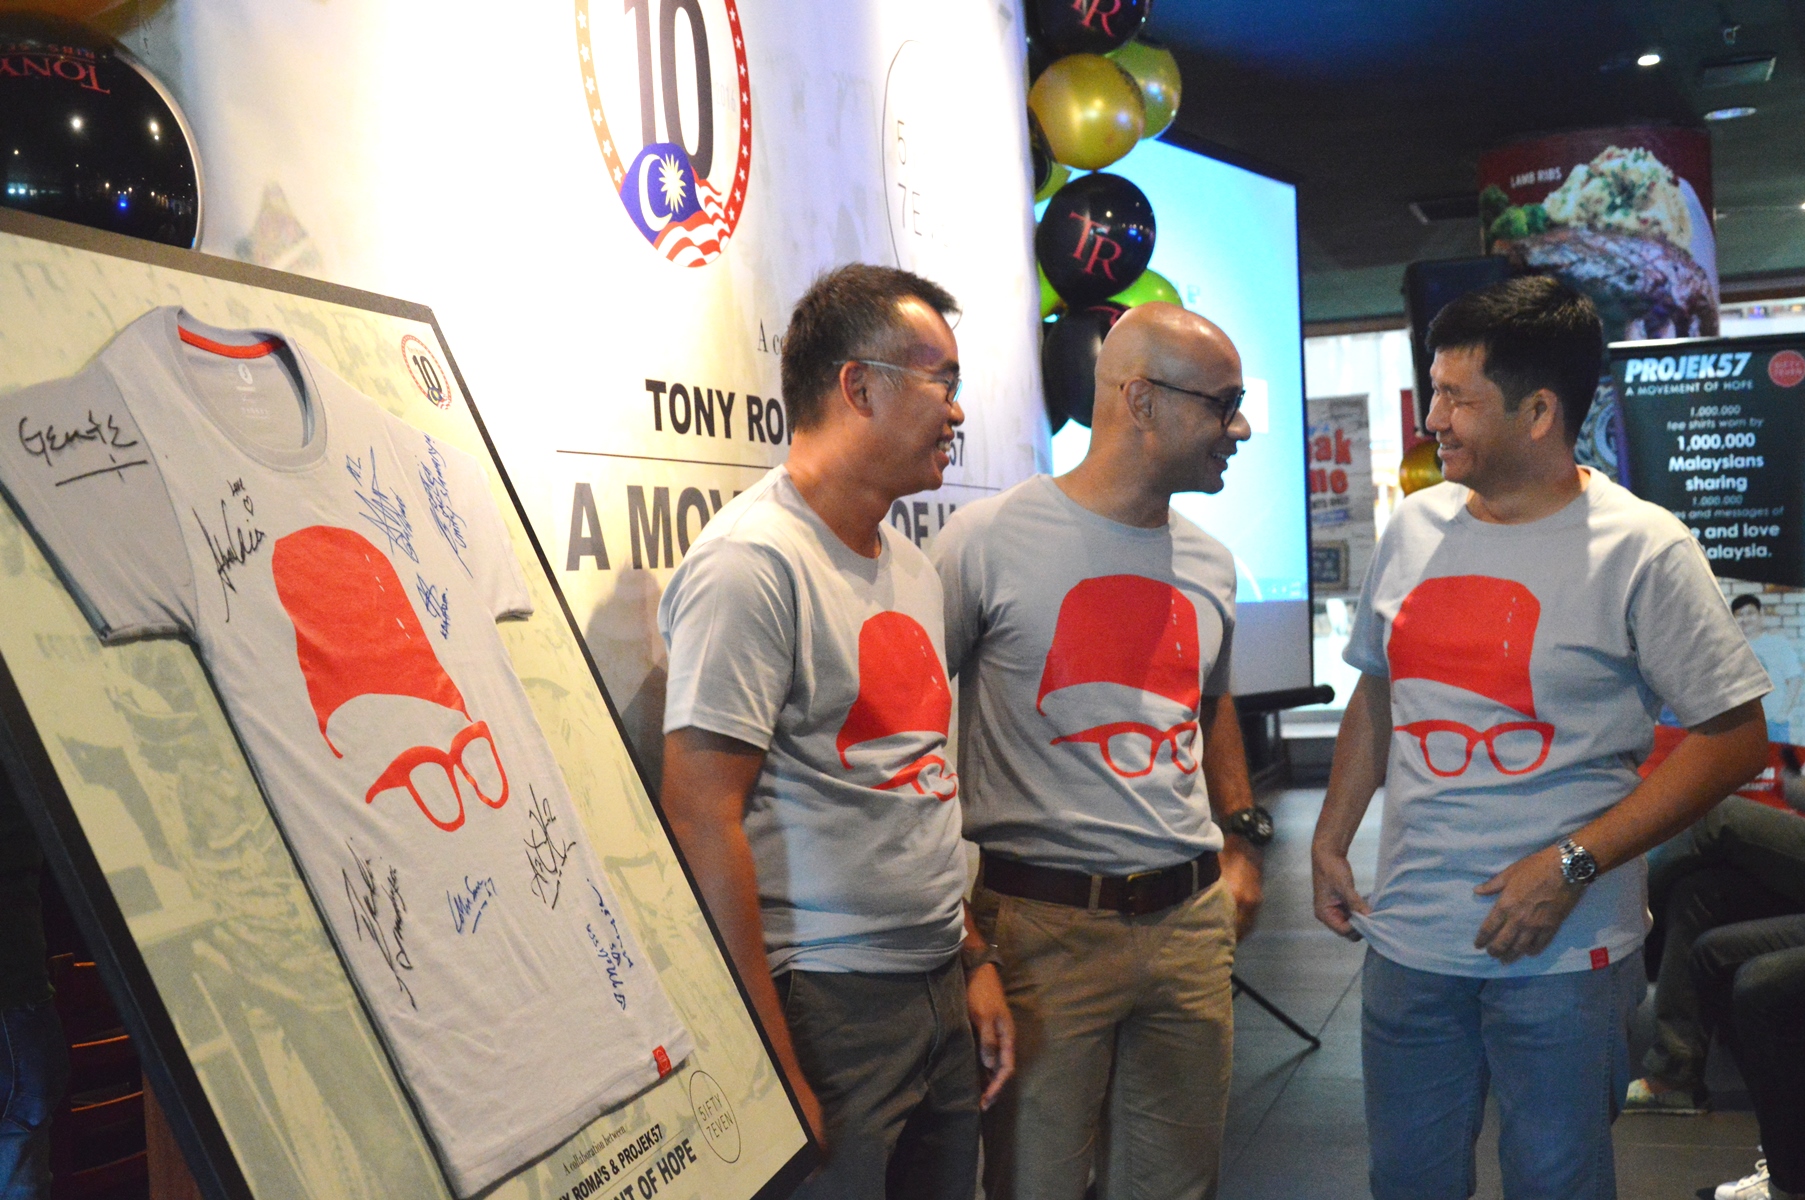 Joining forces between Tony Roma’s and Projek57 in spreading the message of ‘Love, Pride and Unity for the Nation’. From left to right: George Ang, CEO of Grand Companions Sdn Bhd – parent company of Tony Roma’s Malaysia; Syed Sadiq Albar, Co-Founder of Projek57 and Collin Swee, Co-Founder of Projek57.